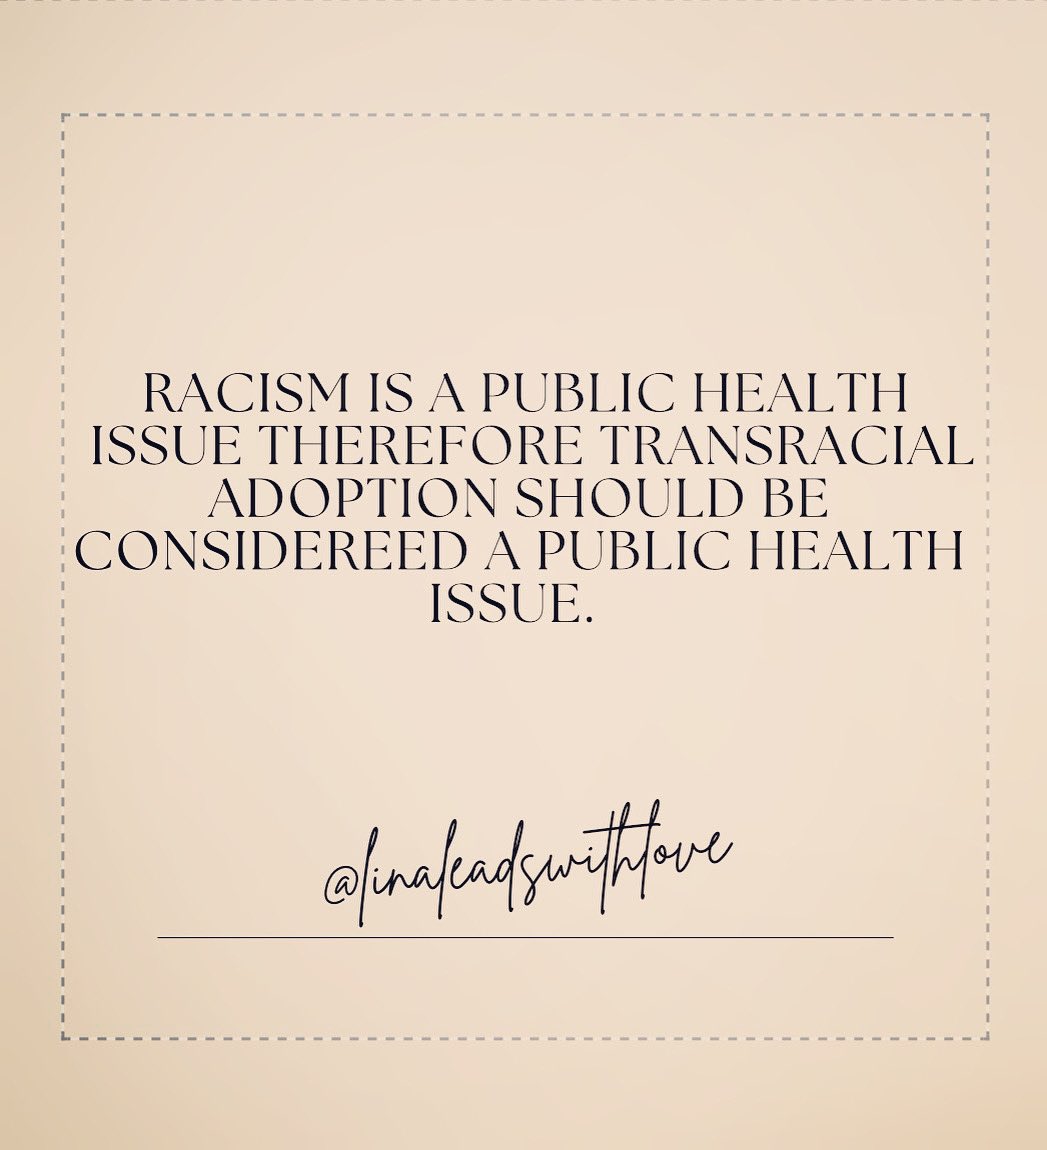 Transracial adoption is a public health issue. #adopteetwitter #adopteevoices